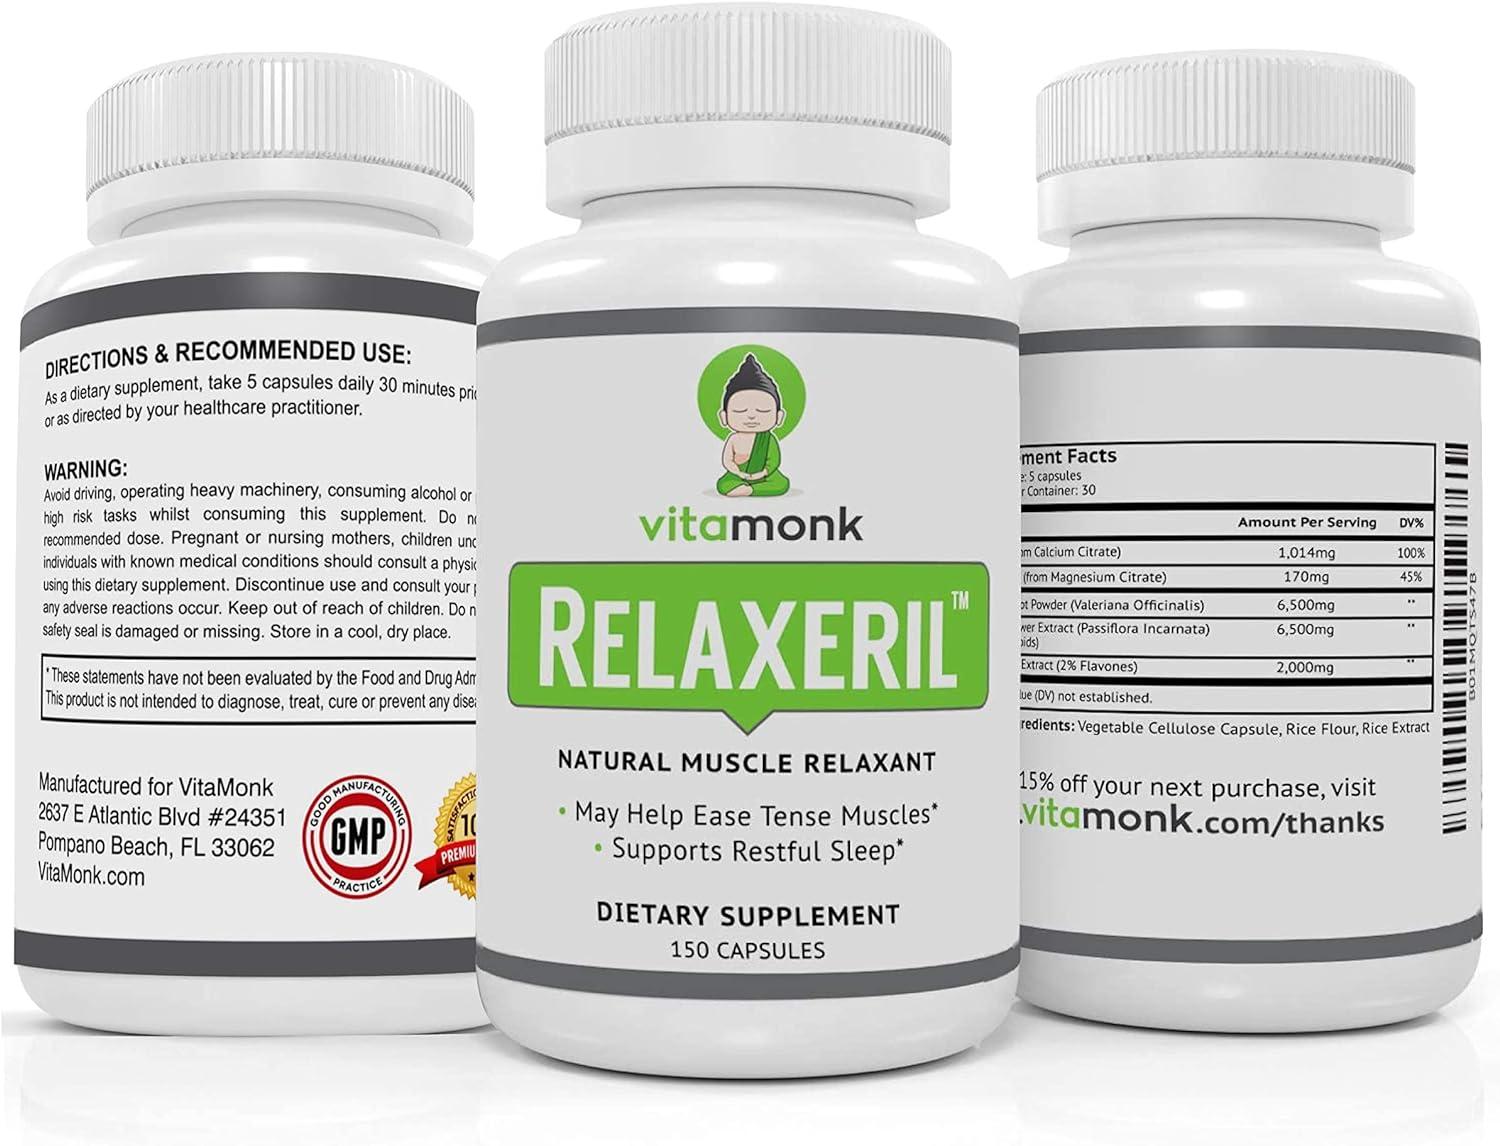 Relaxeril™ - Advanced Natural Muscle Relaxer - Buy Online & Save – VitaMonk